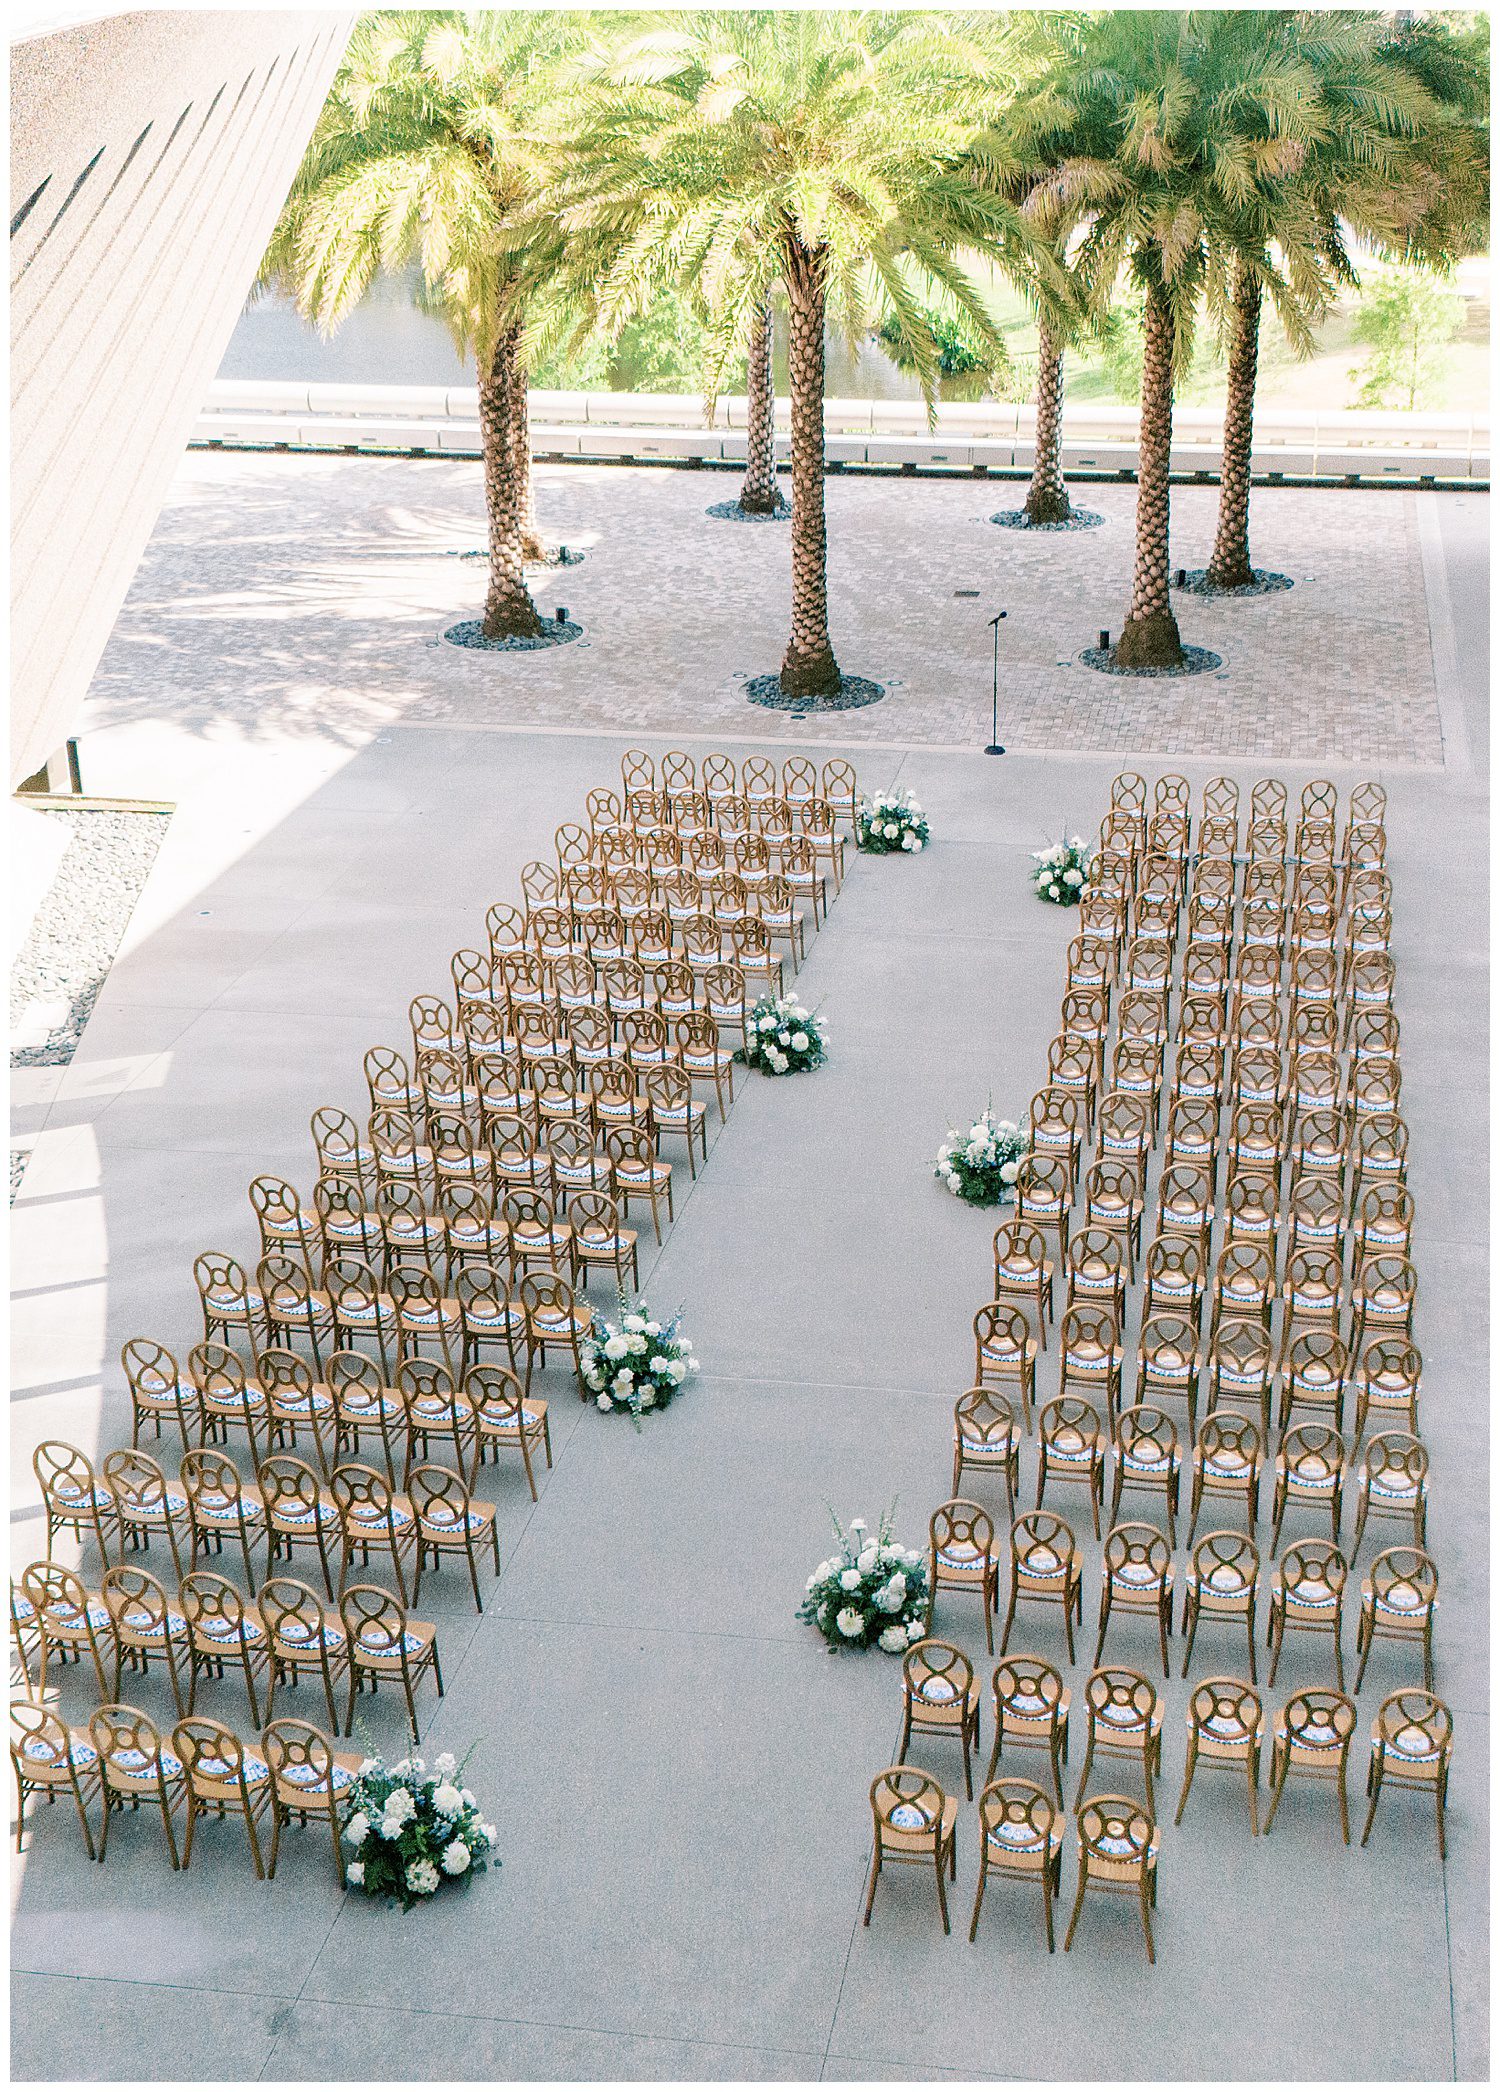 Ceremony setup at the Winter Park Events Center